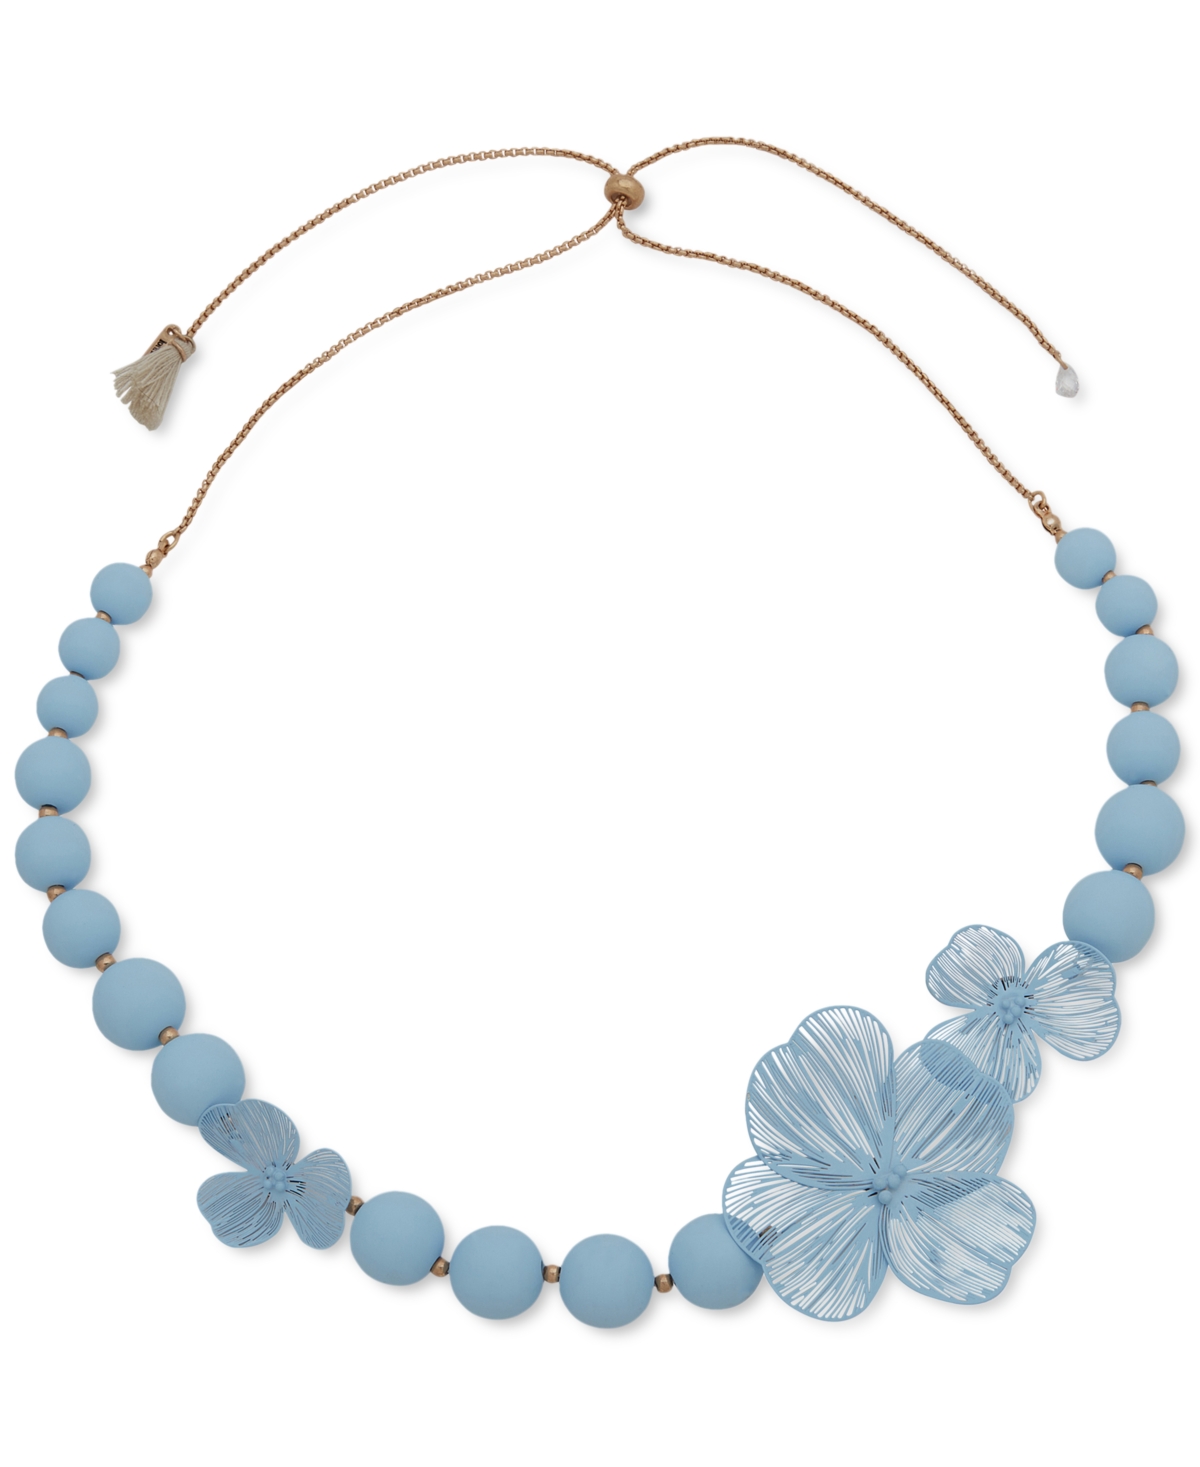 Lonna & Lilly Gold-tone Color Artistic Flower Beaded 18" Adjustable Statement Necklace In Blue